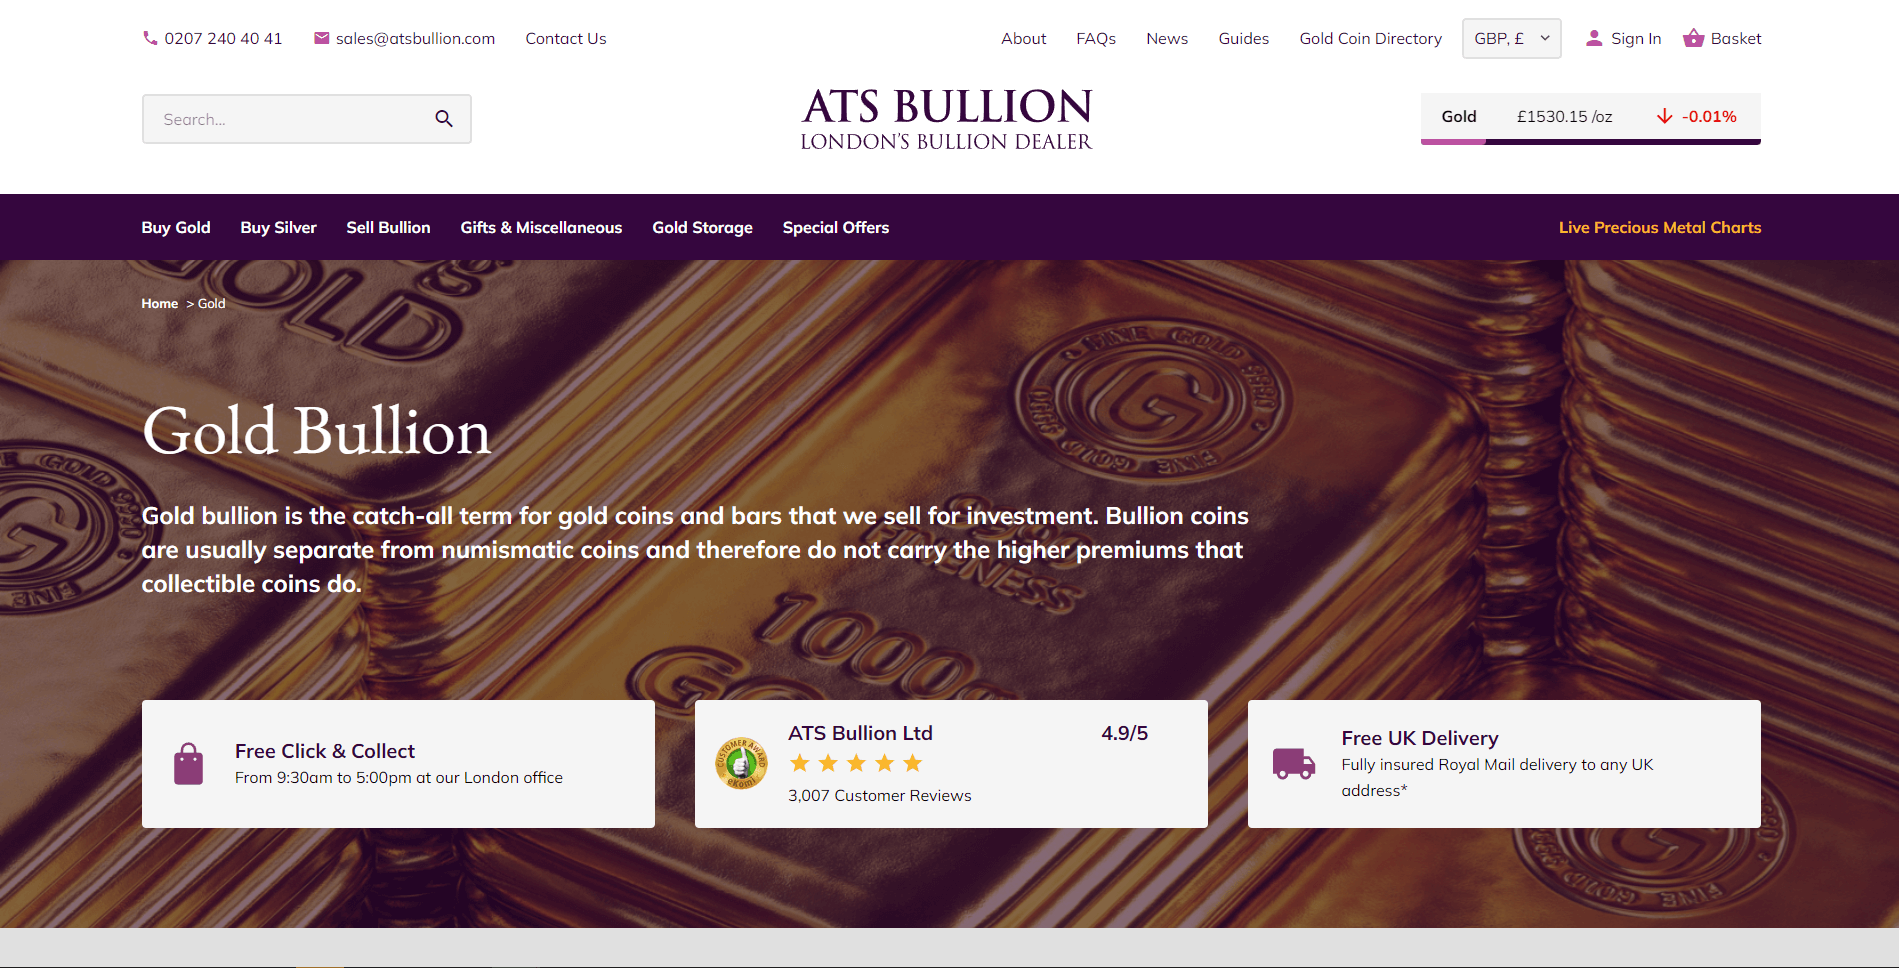 ats bullion gold ira review products and services